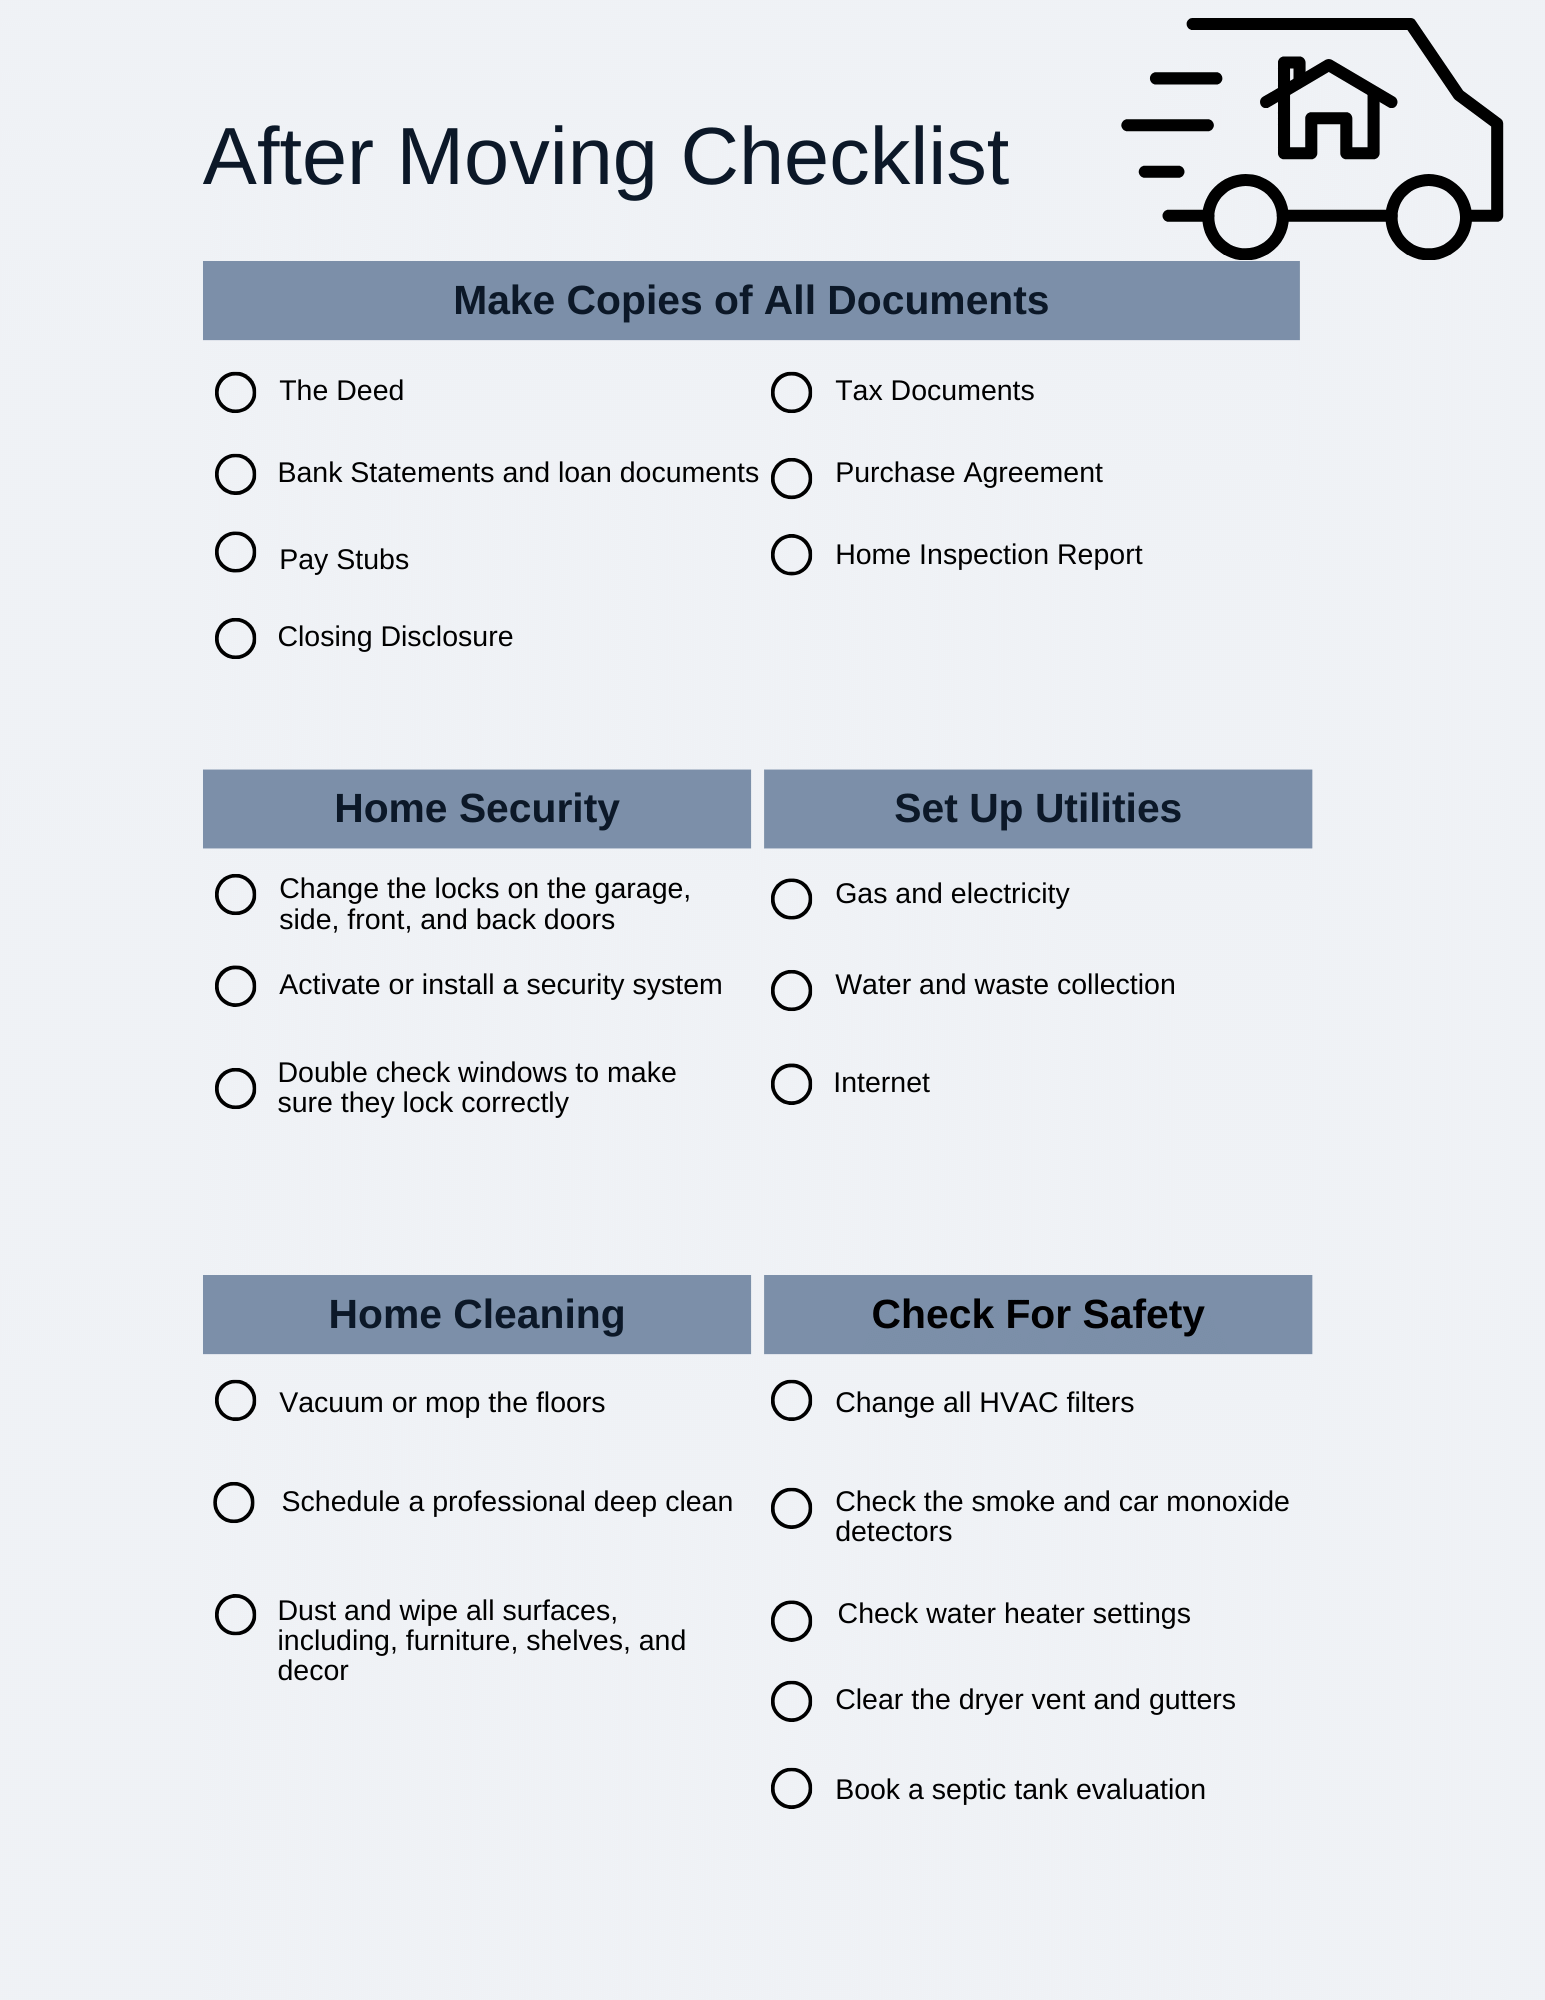 After Moving Checklist